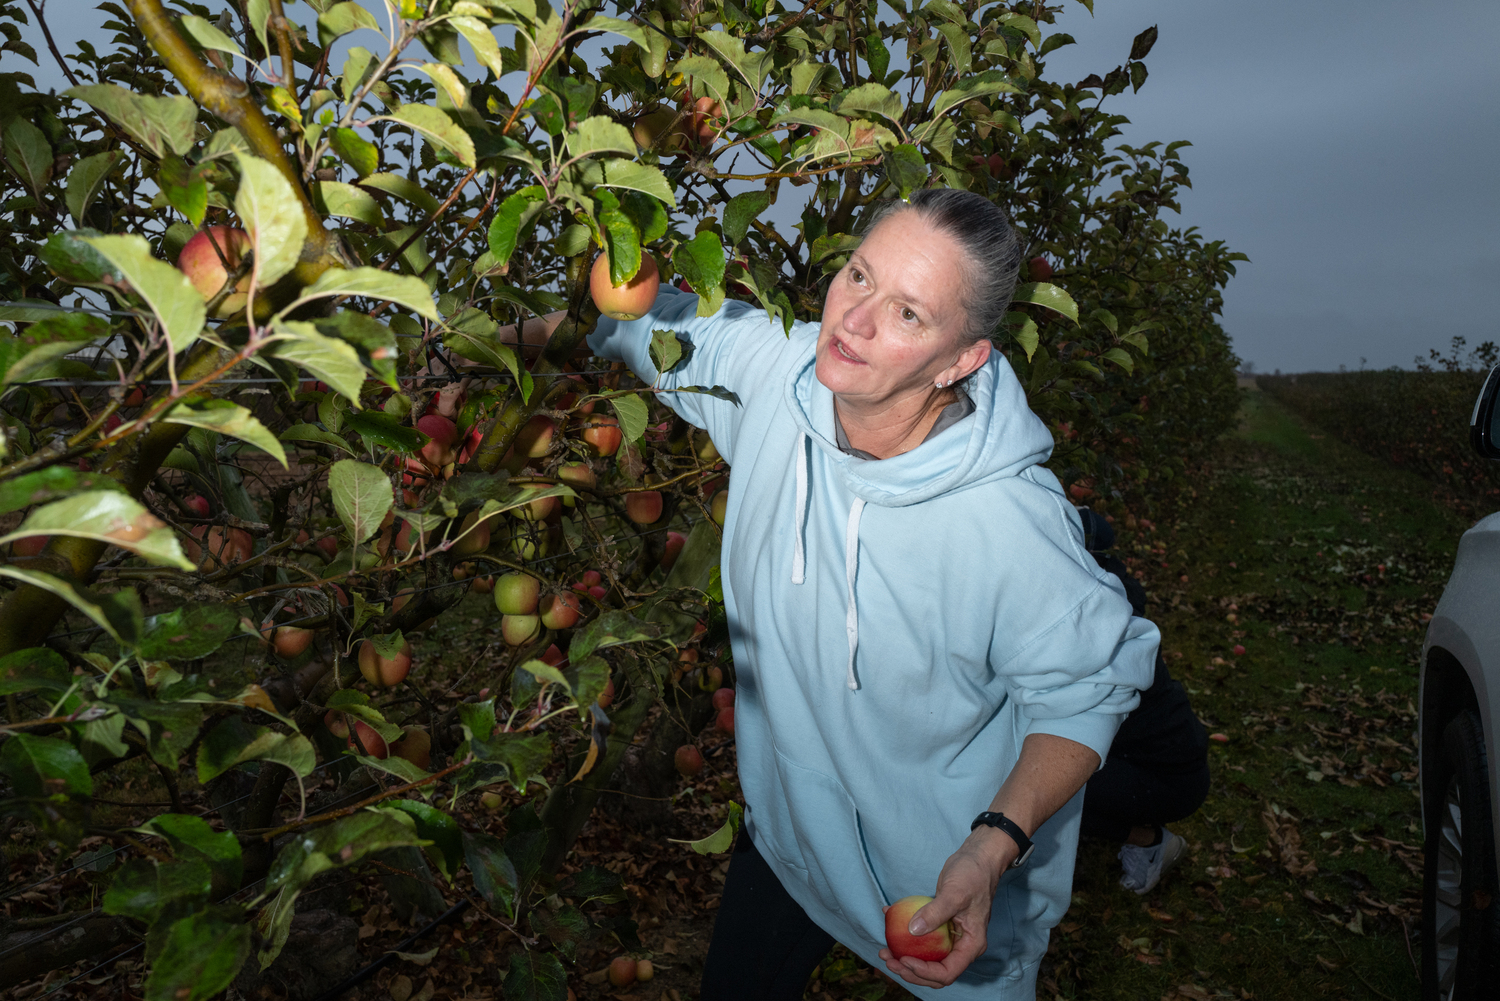 Fran Nill was up early Saturday morning picking extra apples at Halsey Farm in Water Mill. LORI HAWKINS